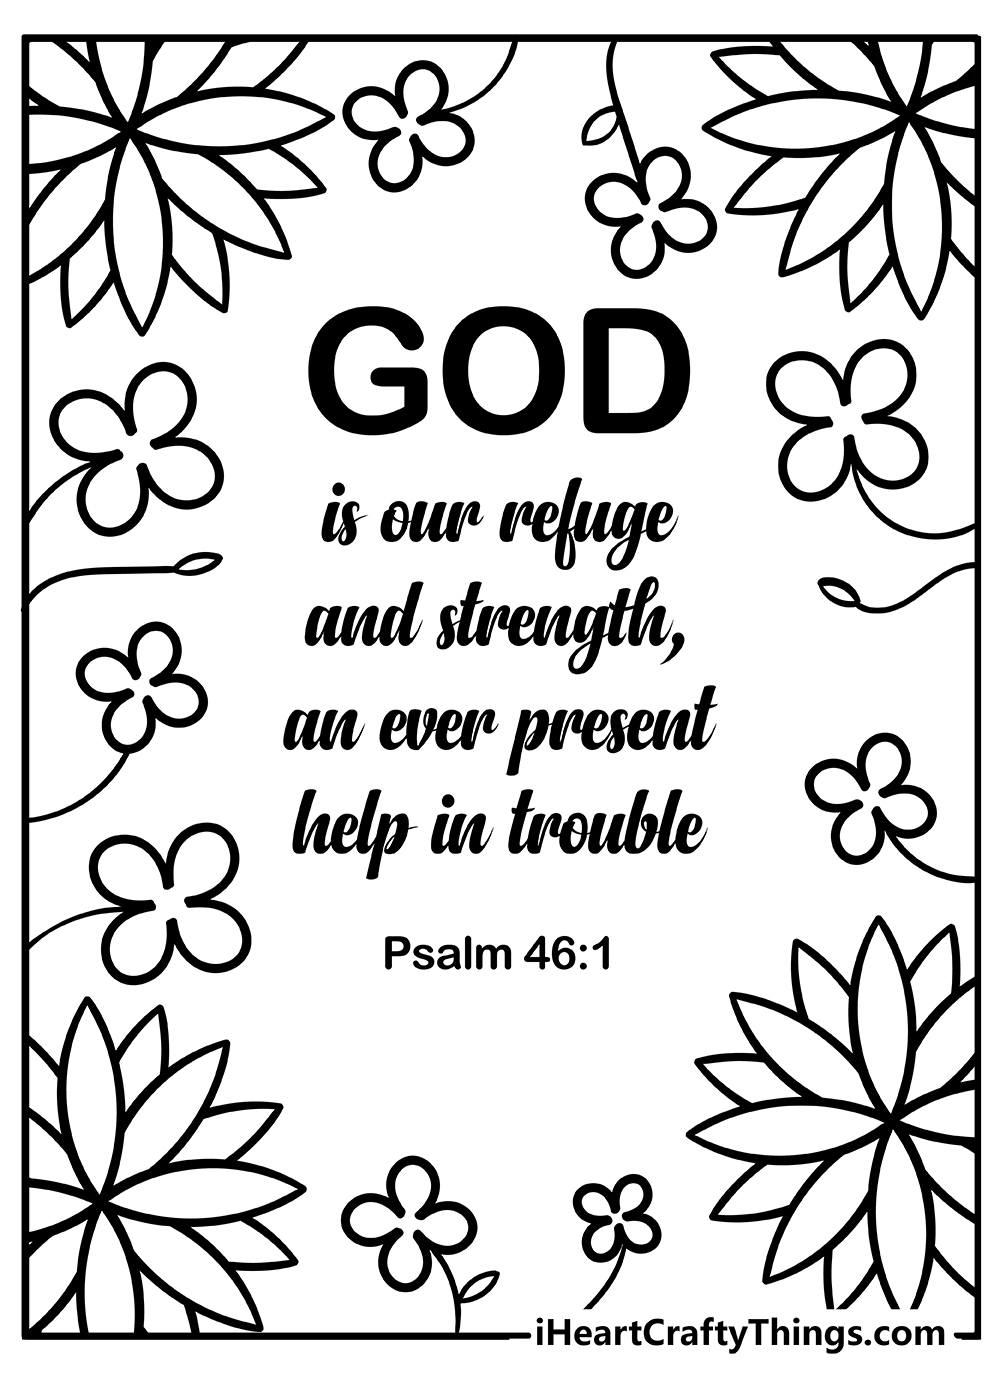 Bible Verse Coloring Pages 100 Free Printables - Free Printable Bible Coloring Pages